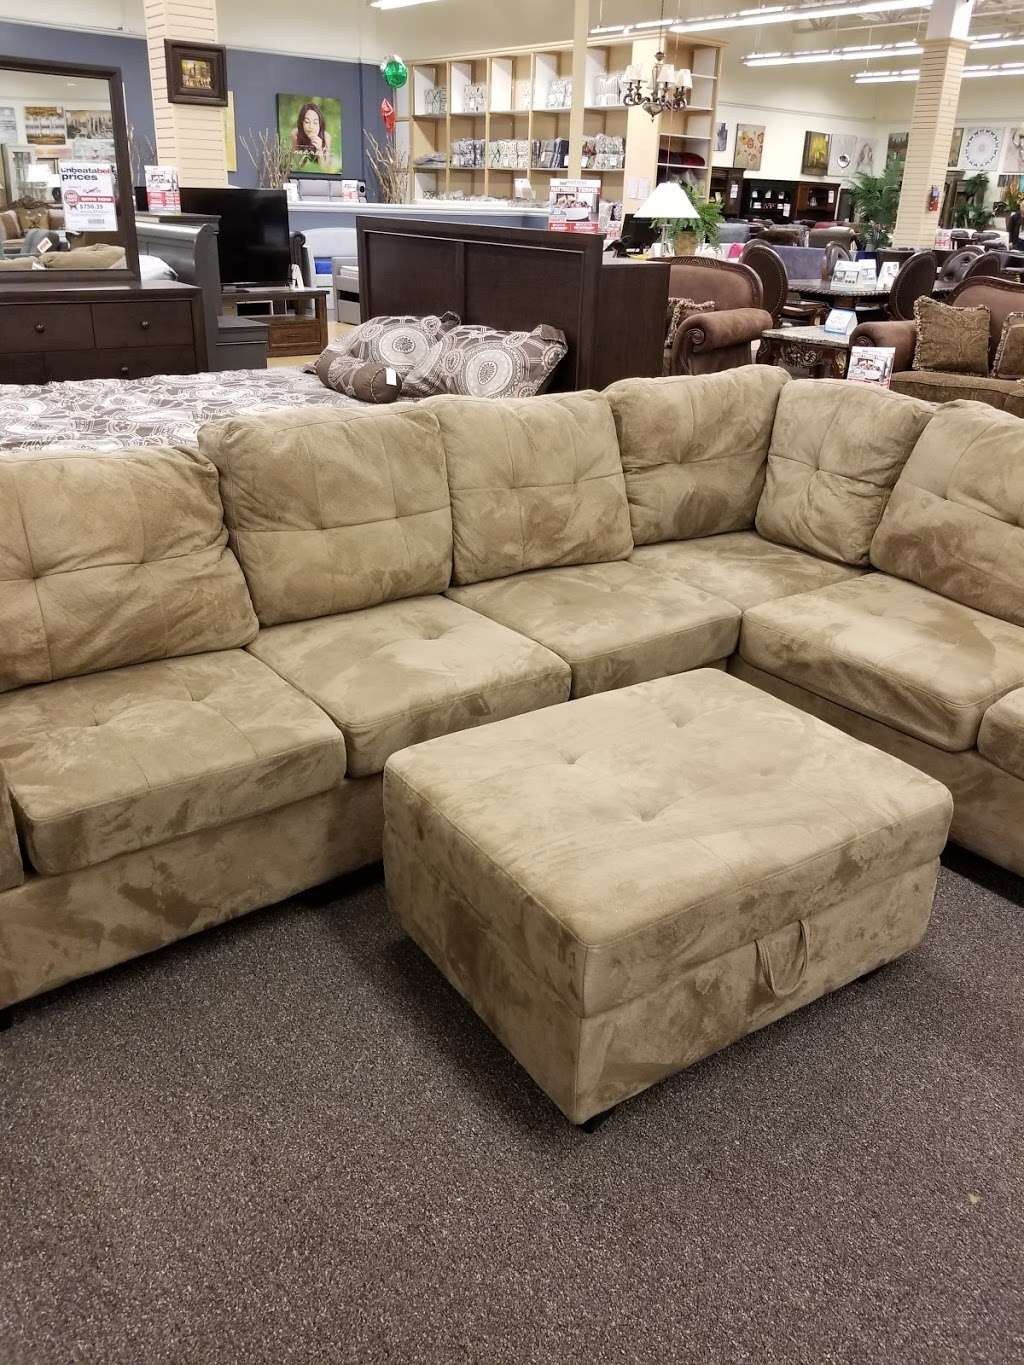 Bel Furniture - Willowbrook | 17355 Tomball Pkwy Suite G, Houston, TX 77064, USA | Phone: (281) 733-2280